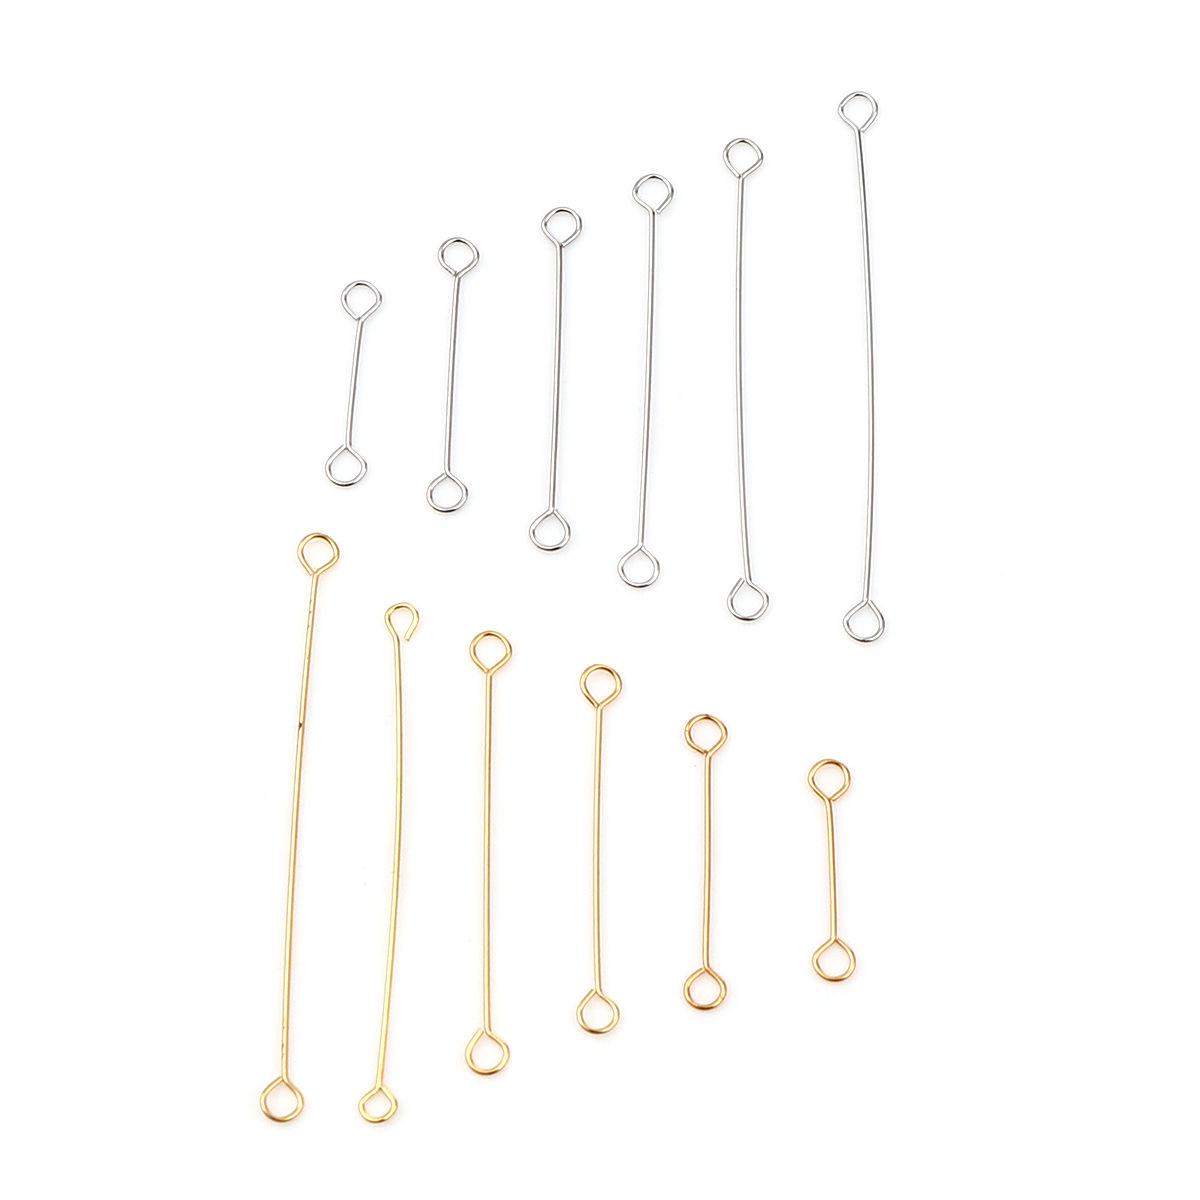 Bild von Iron Based Alloy Eye Eye Pins Gold Plated 20mm( 6/8") long, 0.4mm 1 Packet (Approx 50 PCs/Packet)